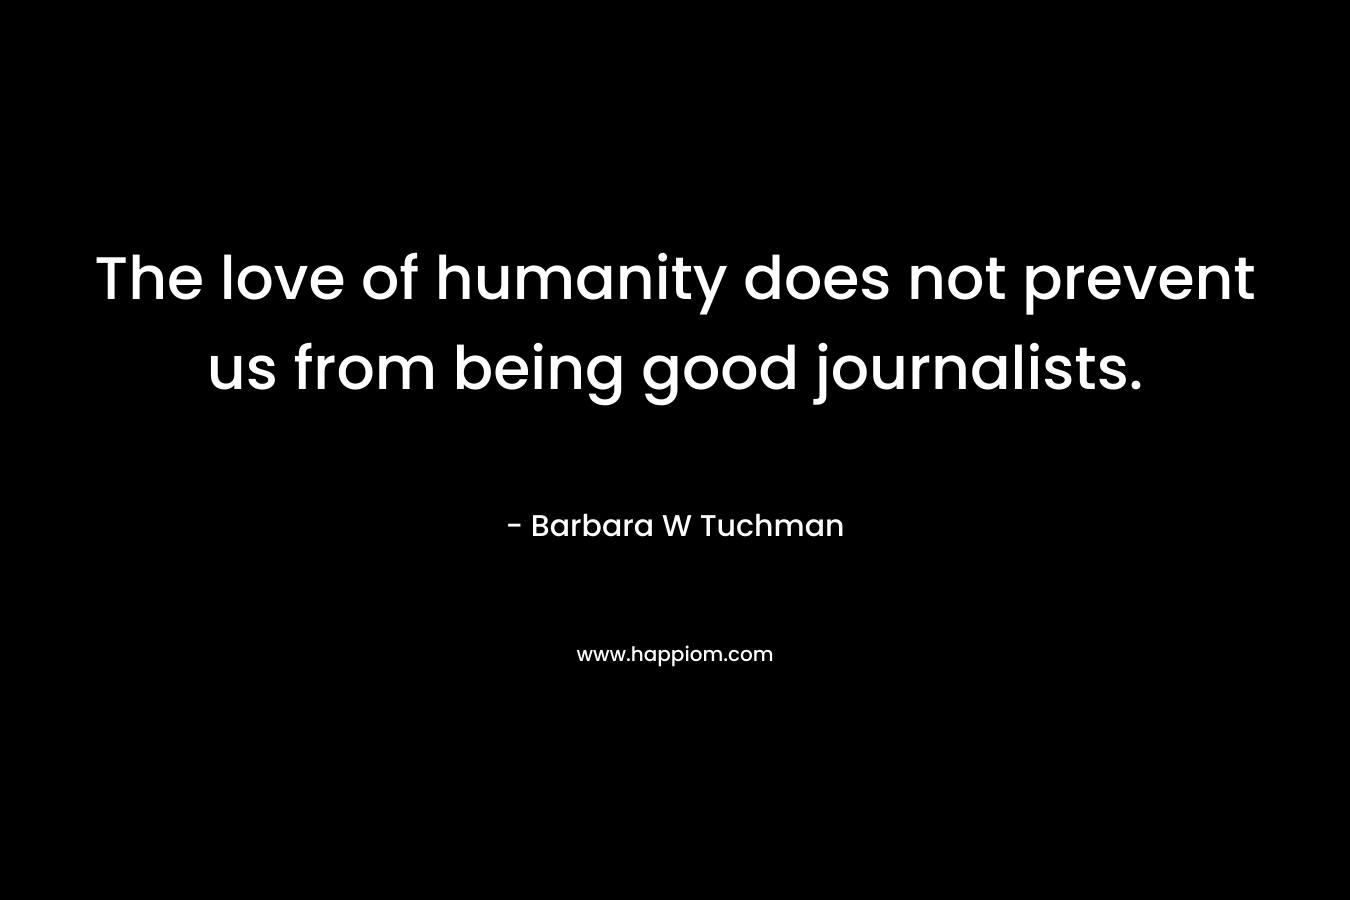 The love of humanity does not prevent us from being good journalists. – Barbara W Tuchman